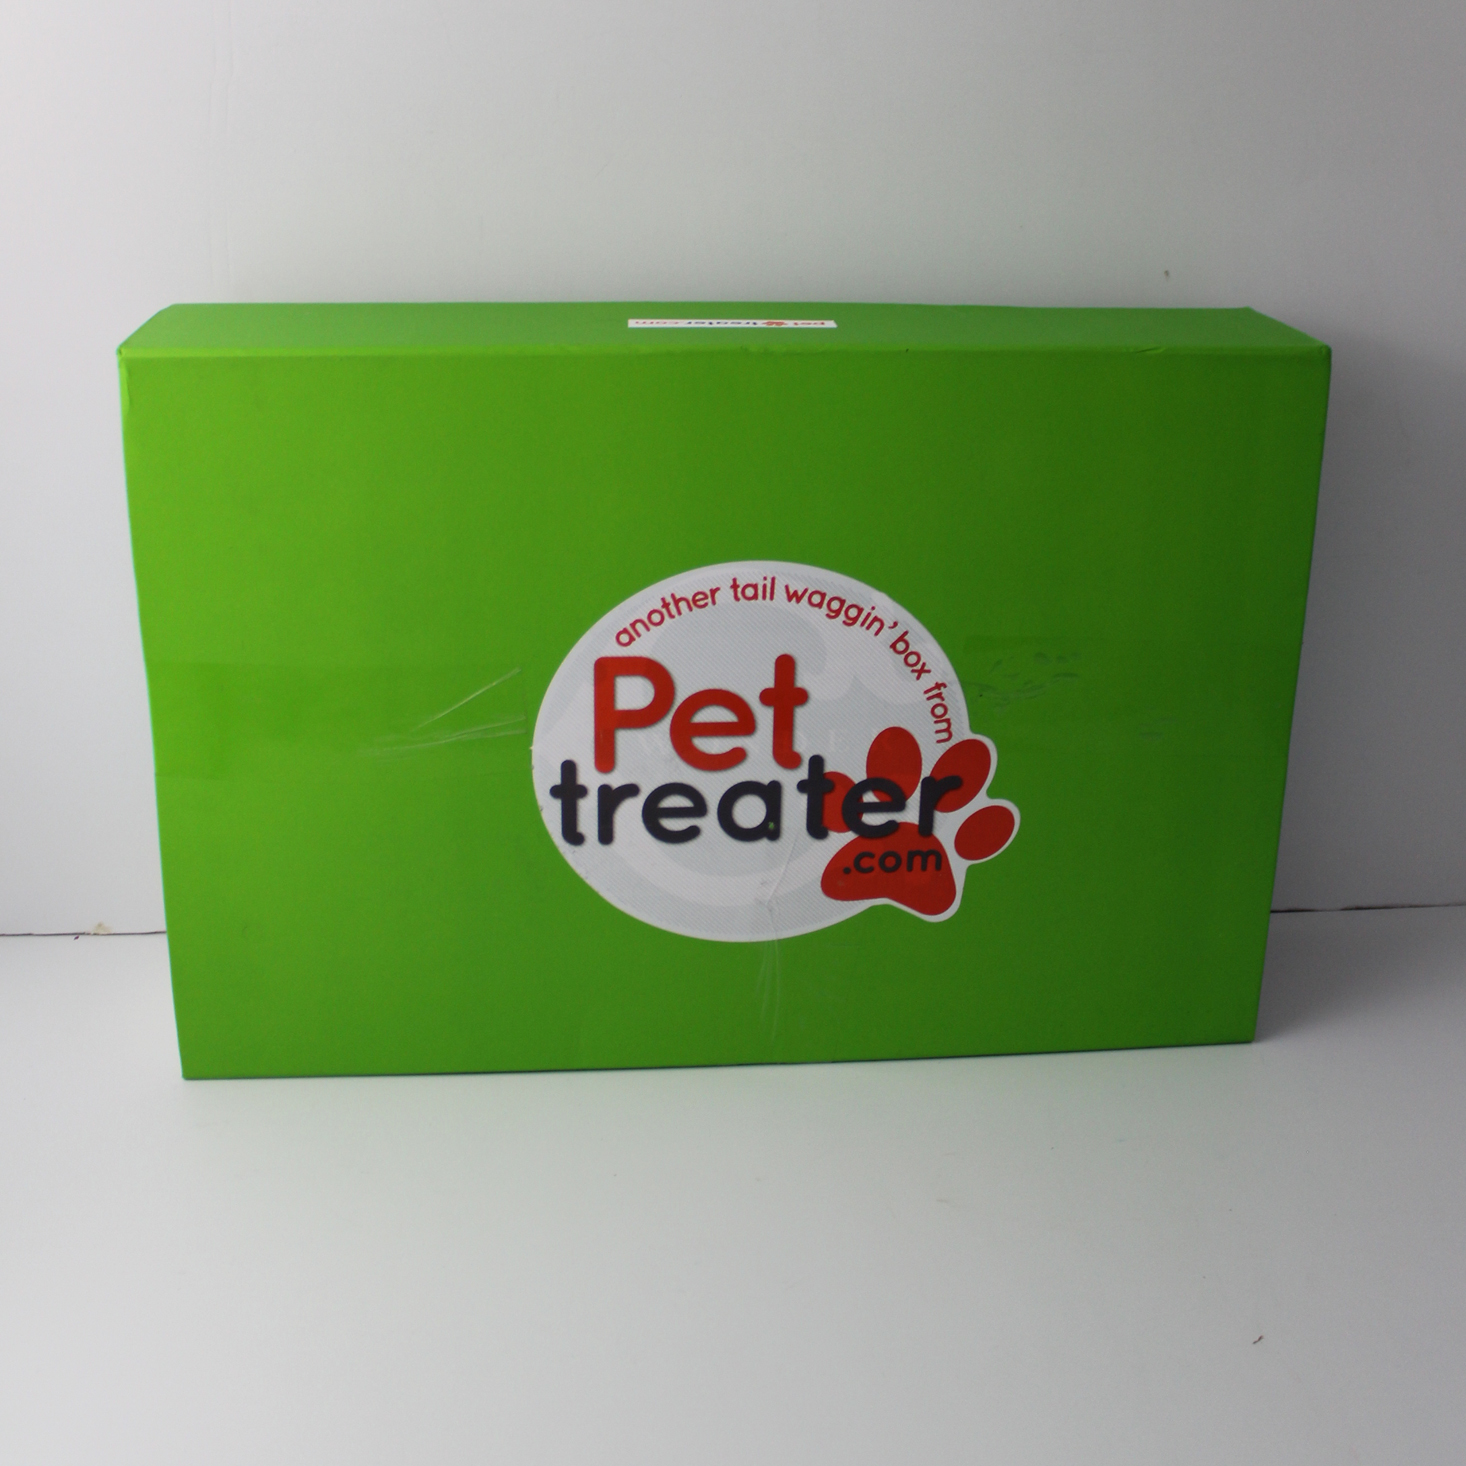 Pet Treater Dog Subscription Review + Coupon – February 2019